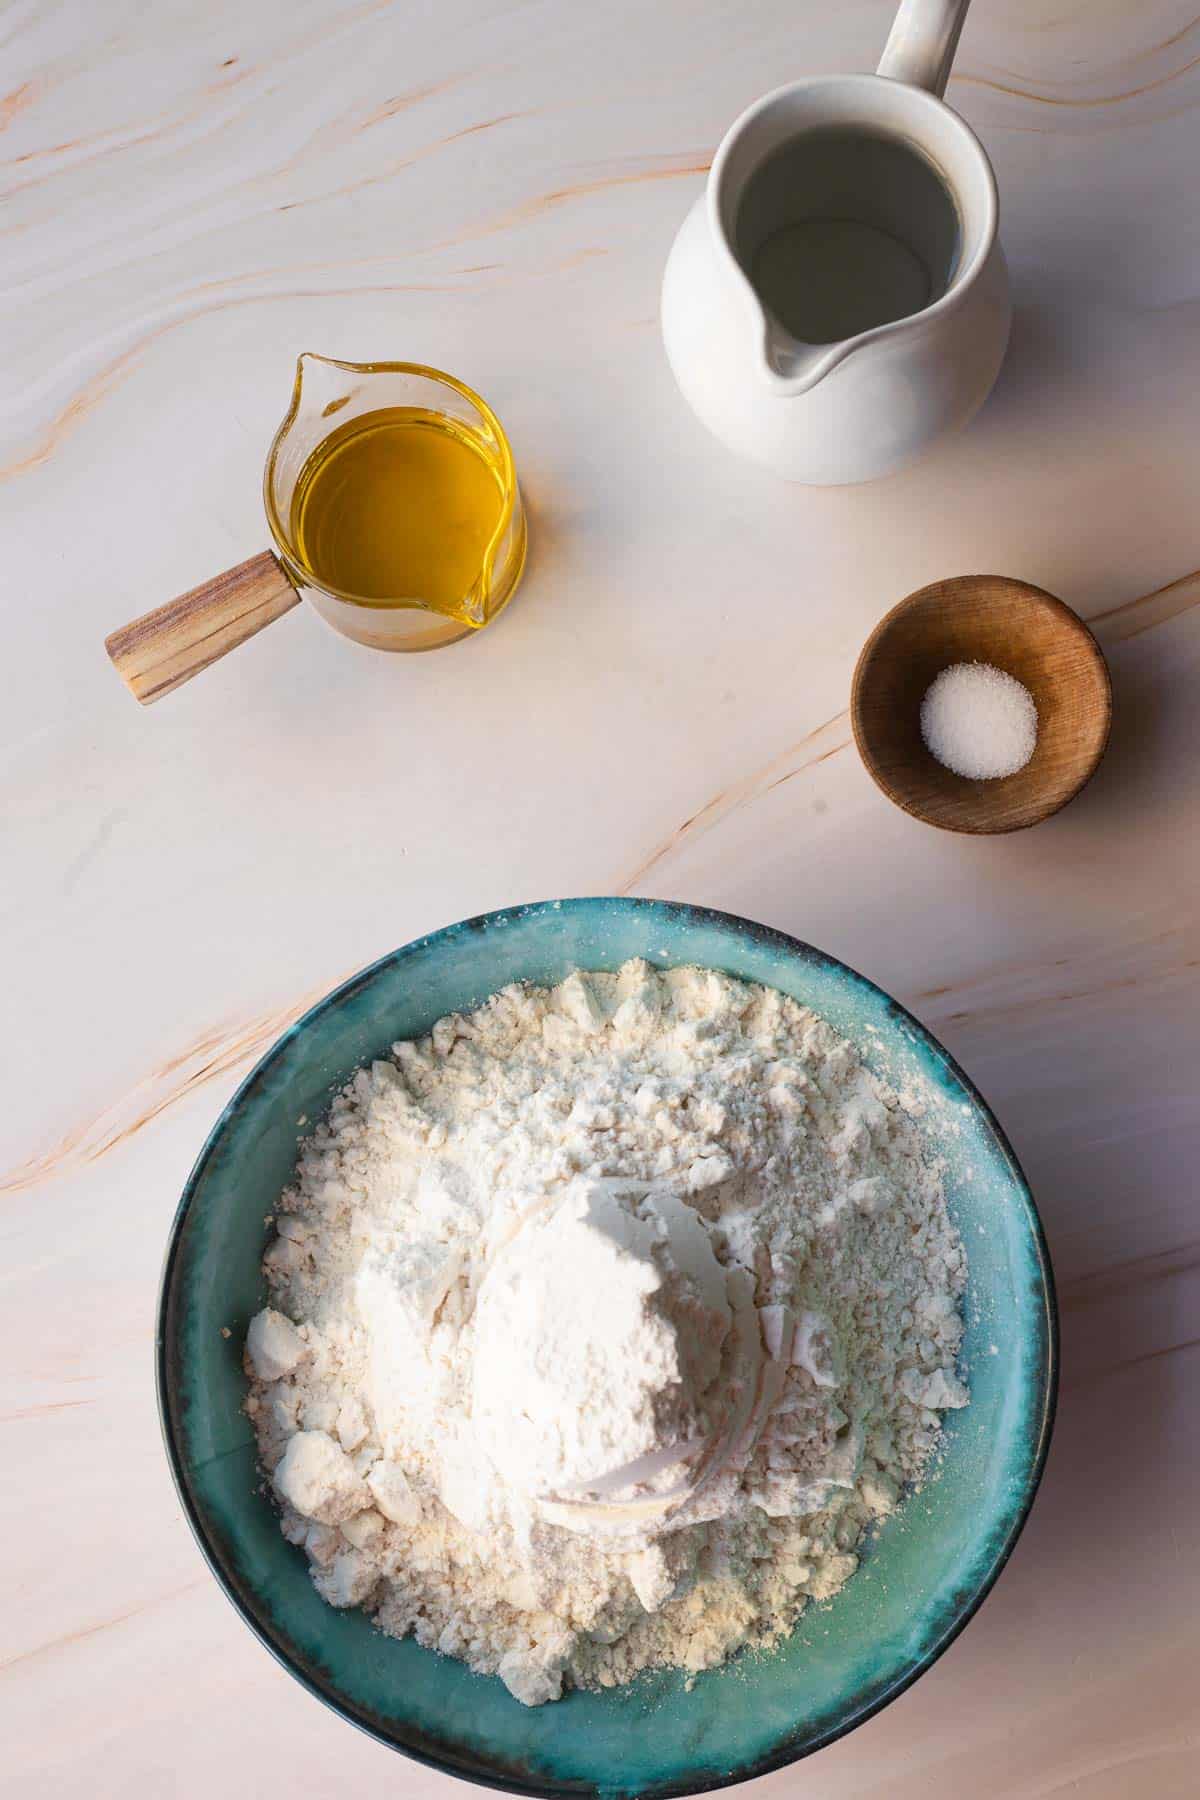 A top-down view of baking ingredients on a table for a gluten-free matzo recipe, featuring a bowl of flour, a jug of milk, a cup of oil, and a small bowl of salt